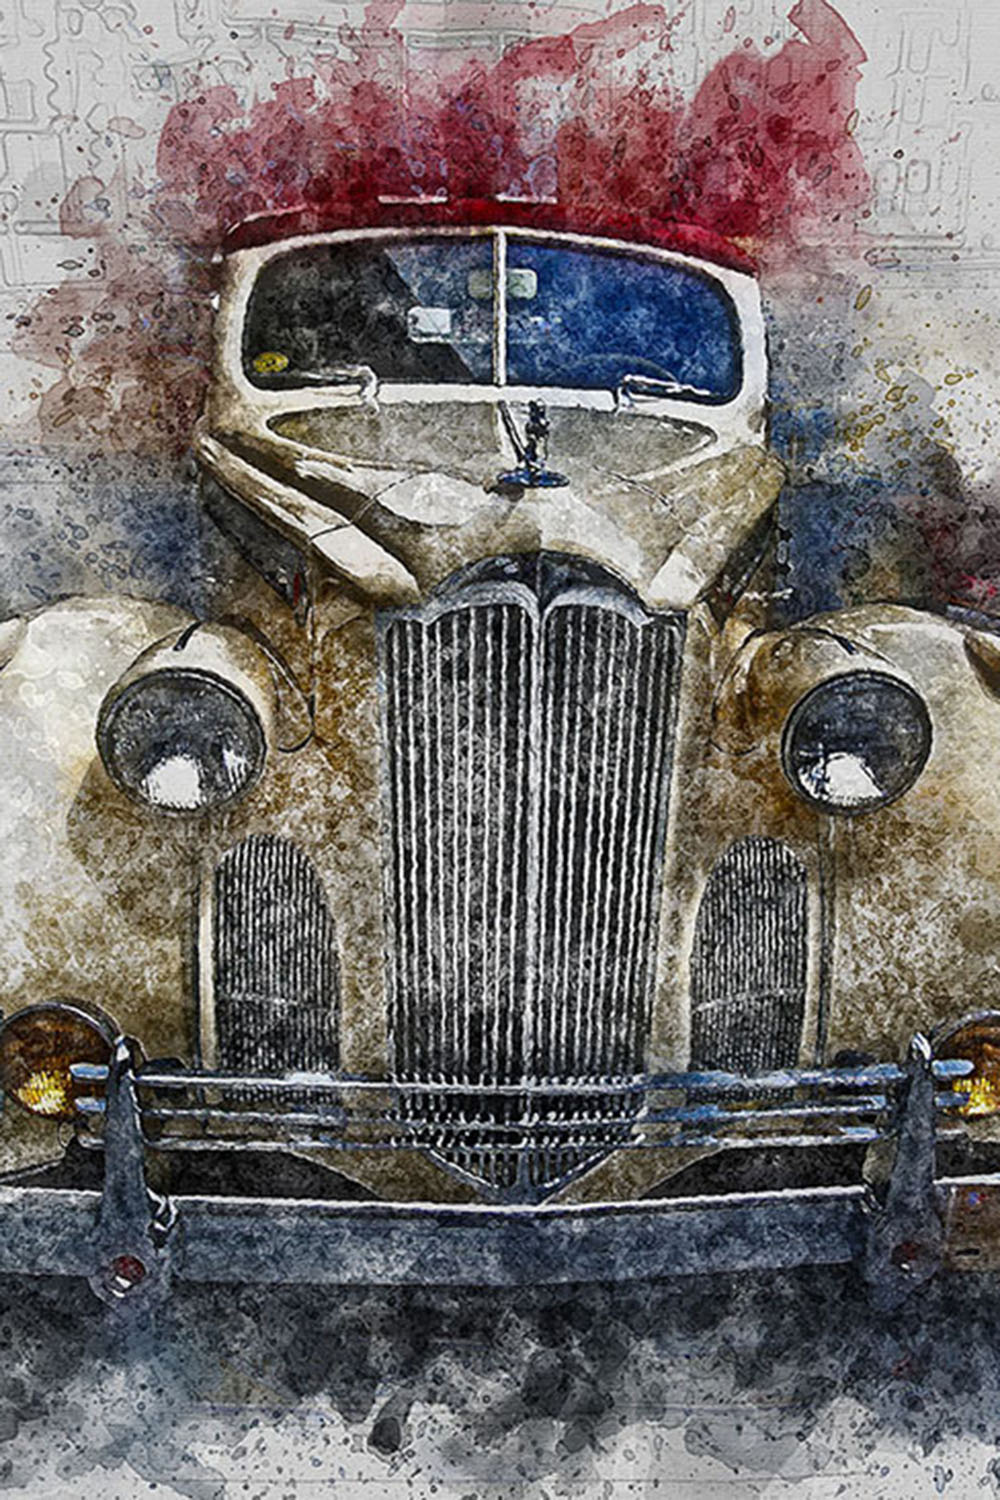 Bundle of 12 Vintage Classic Cars HQ Graphics with Grunge Style pinterest image.